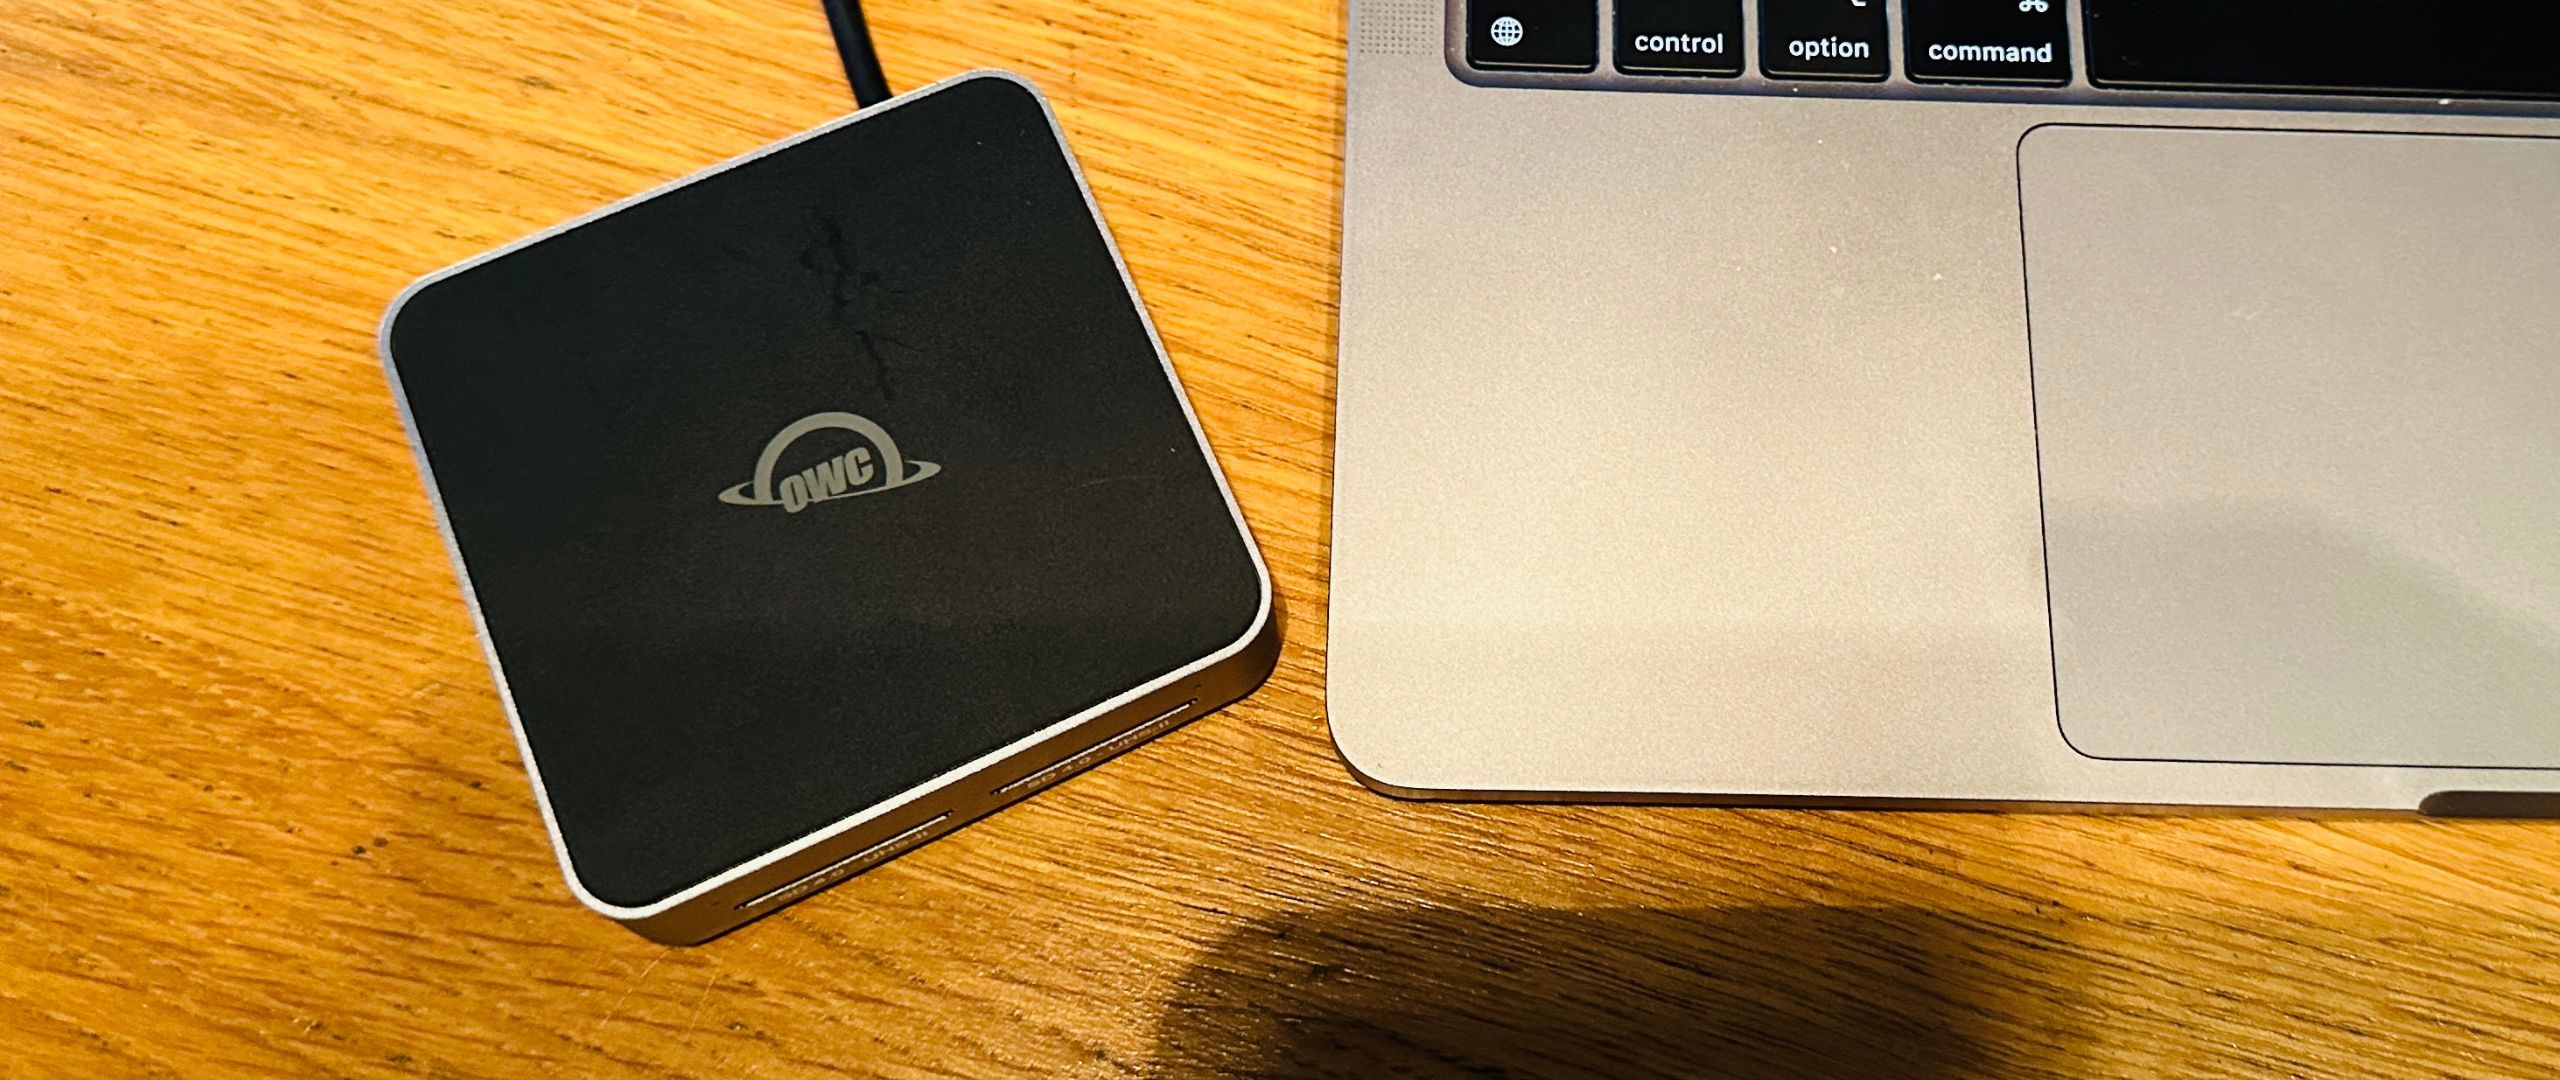 Atlas Dual SD Reader review: supercharge content transfers